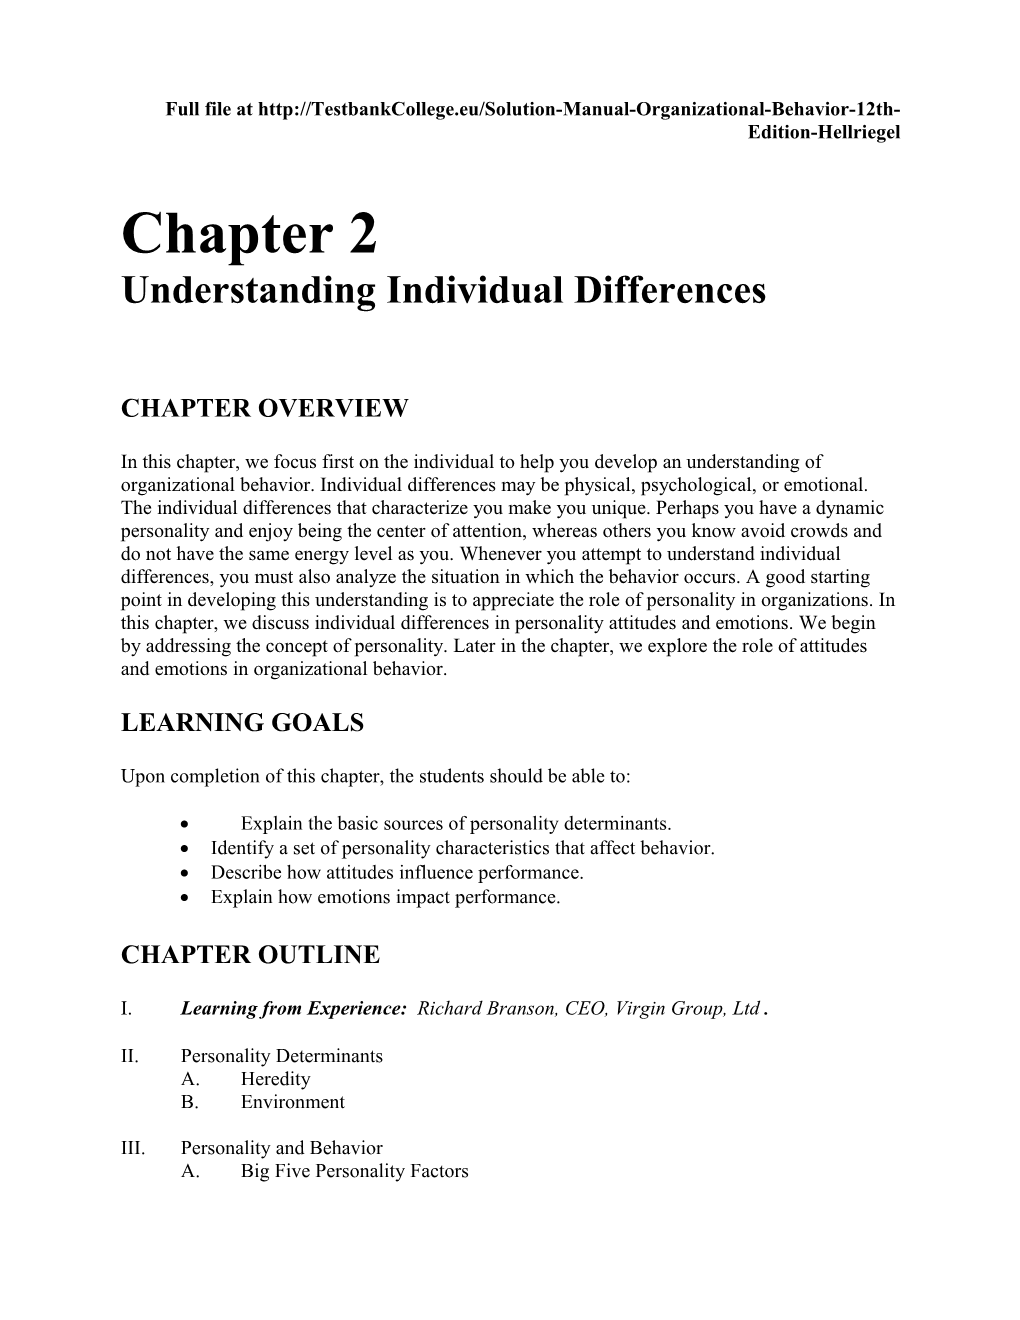 Chapter 2: Understanding Individual Differences